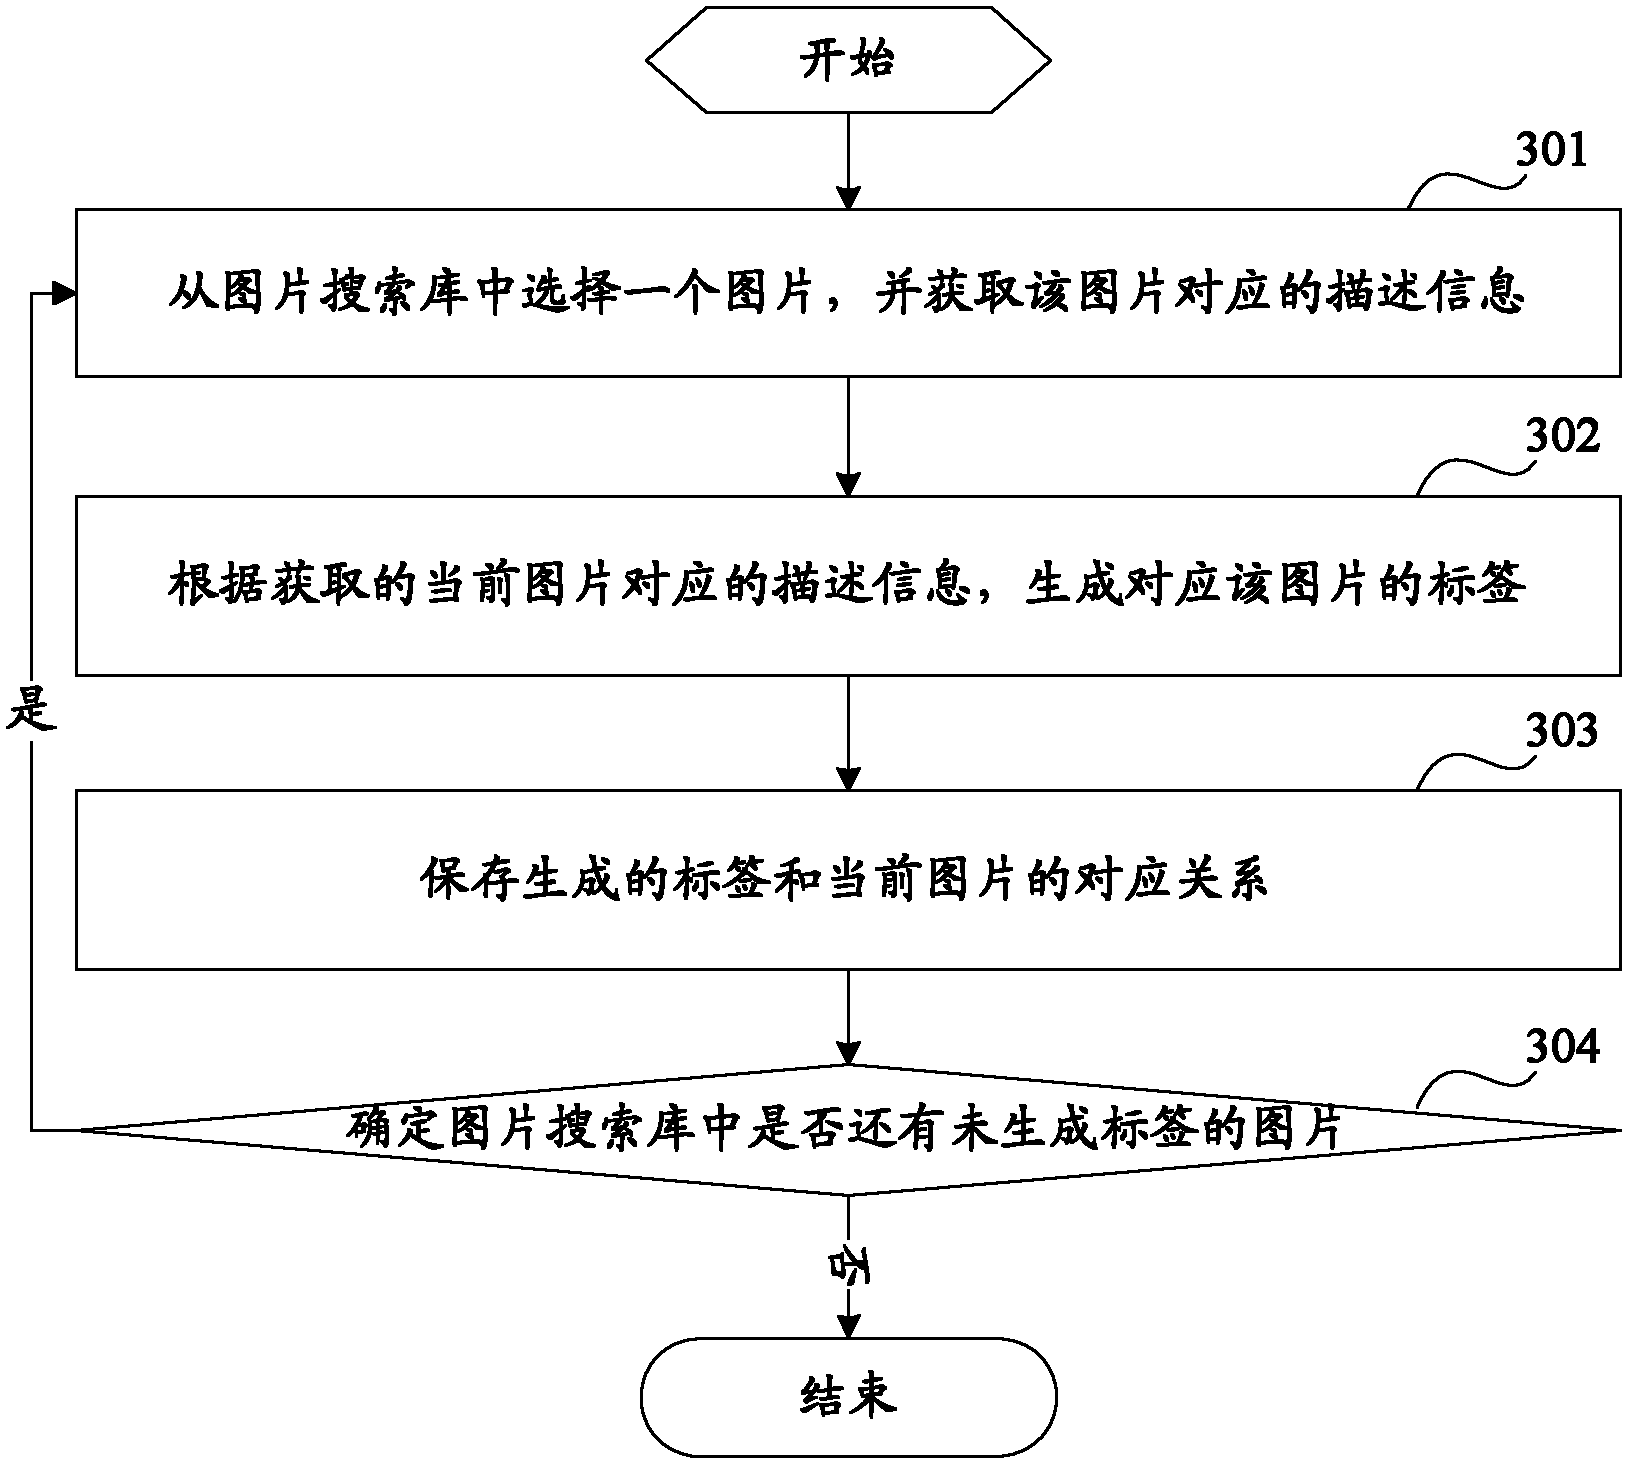 Image search method and image search device